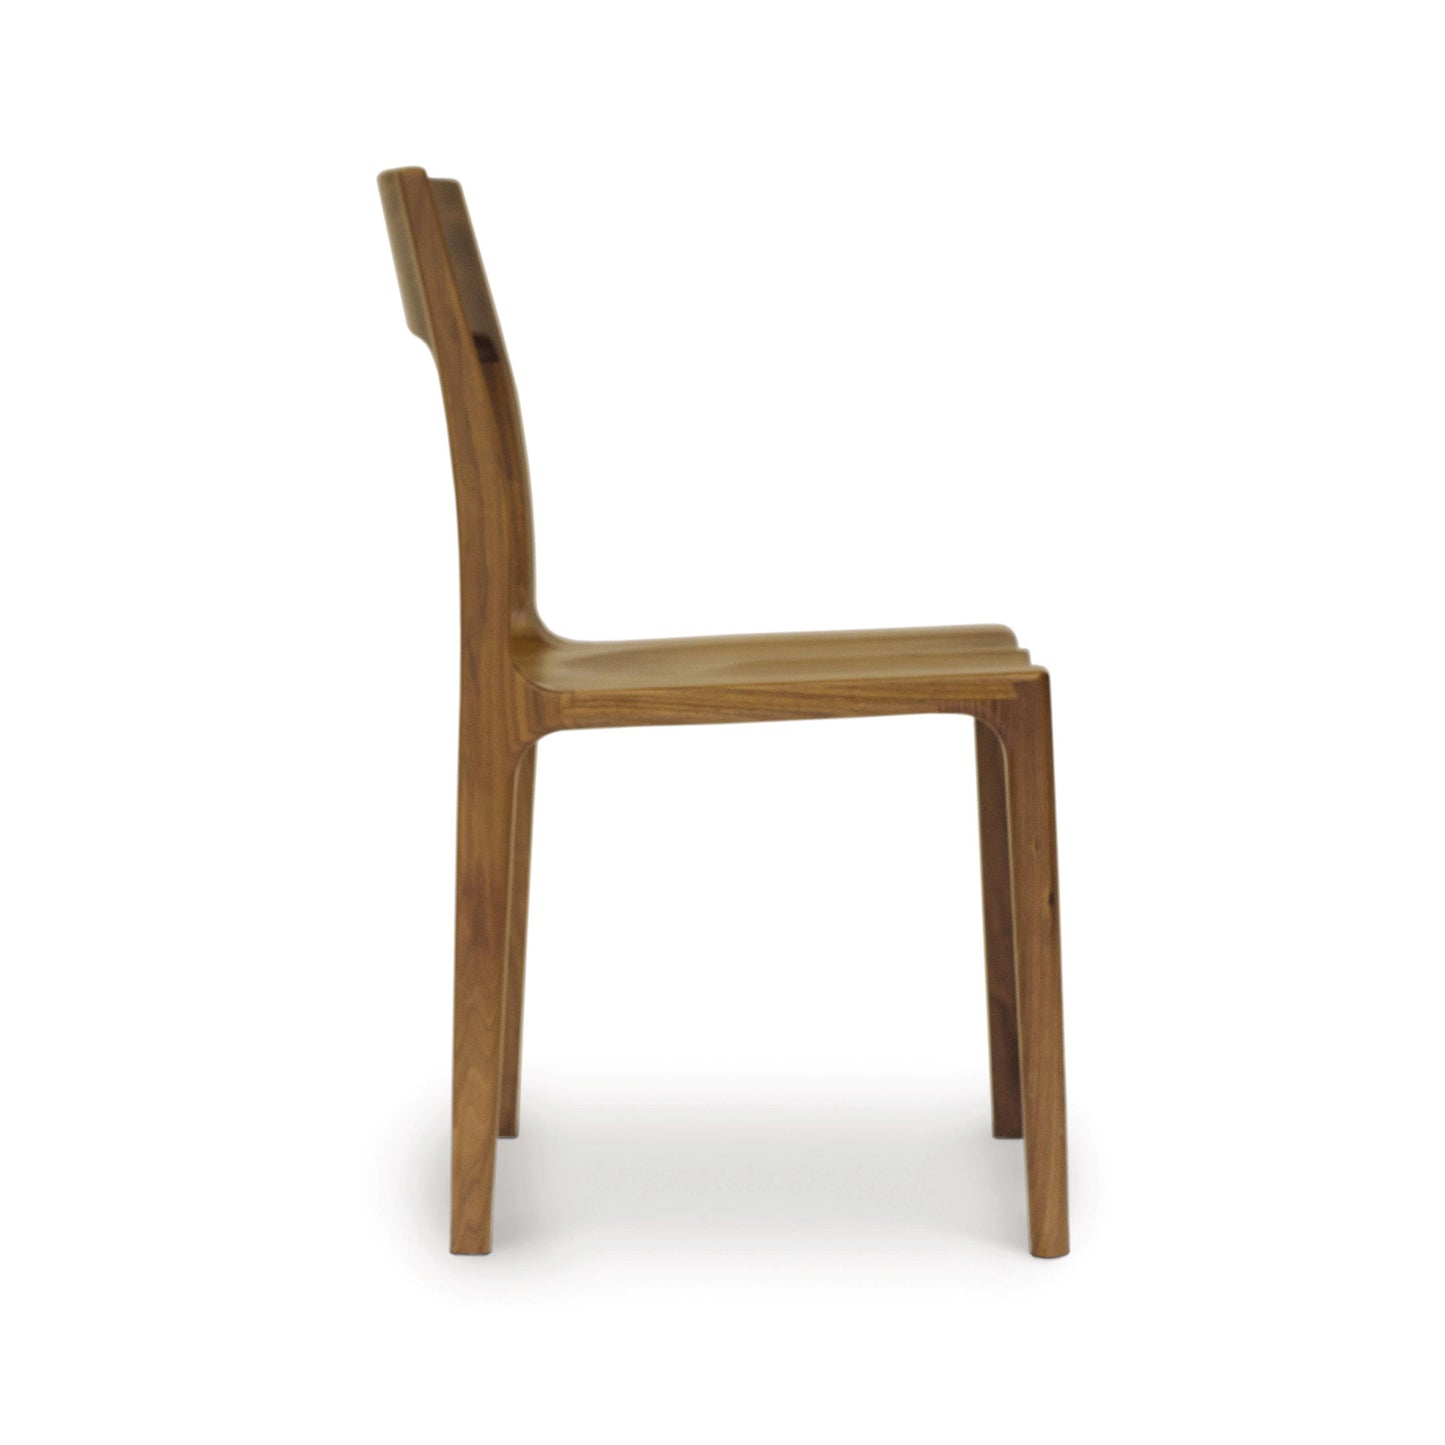 A wooden chair on a white background.